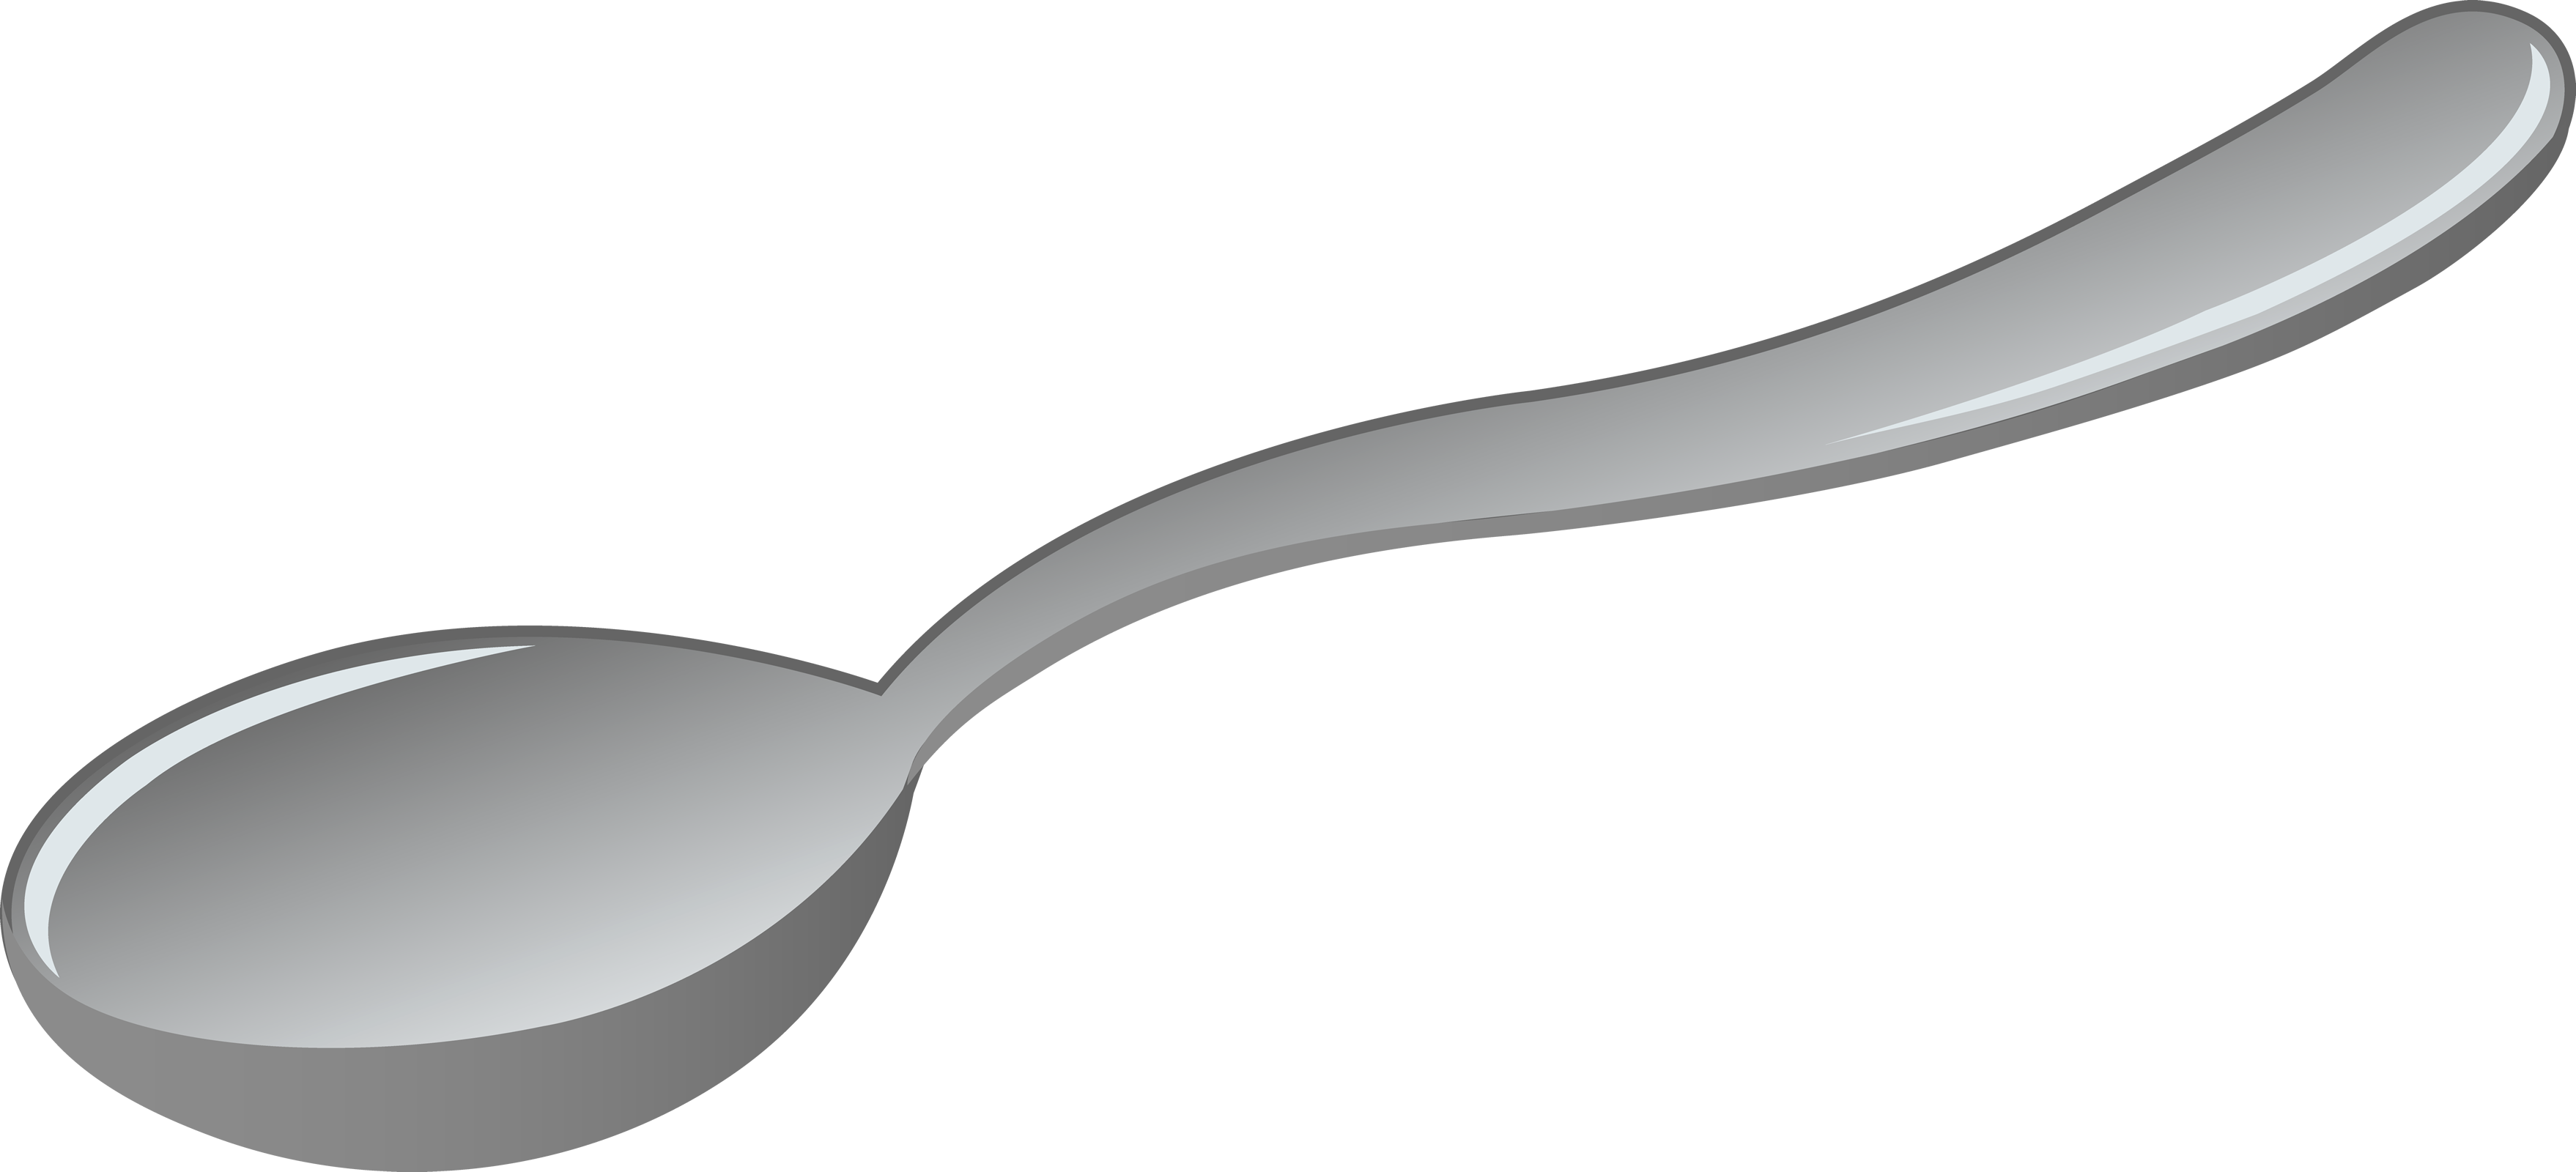 Spoon PNG image, download free spoon pictures.